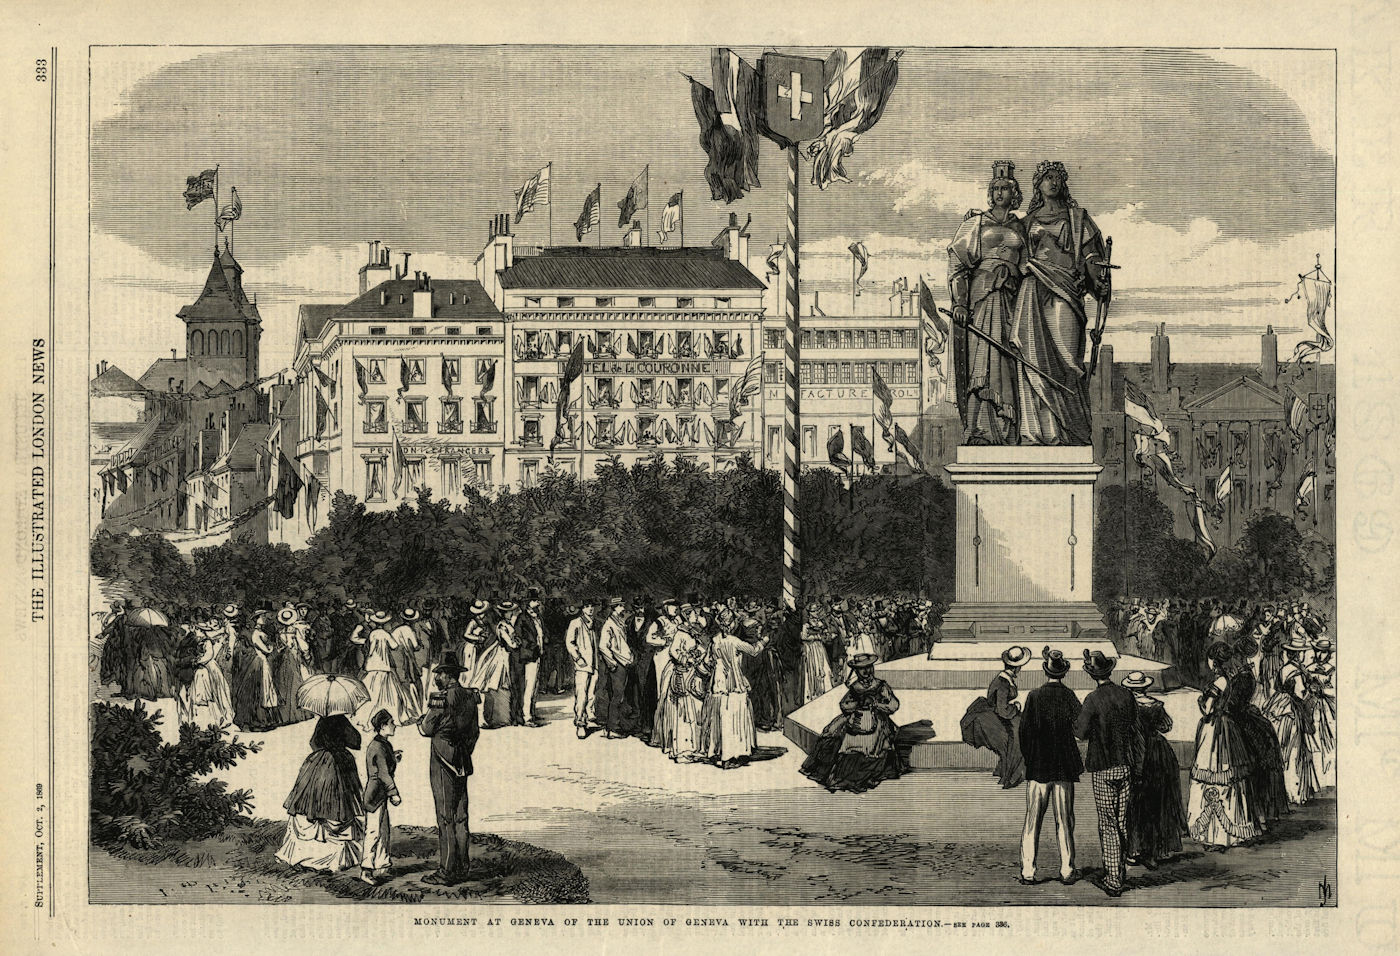 Associate Product Monument of Union of Geneva with the Swiss Confederation. Switzerland 1869